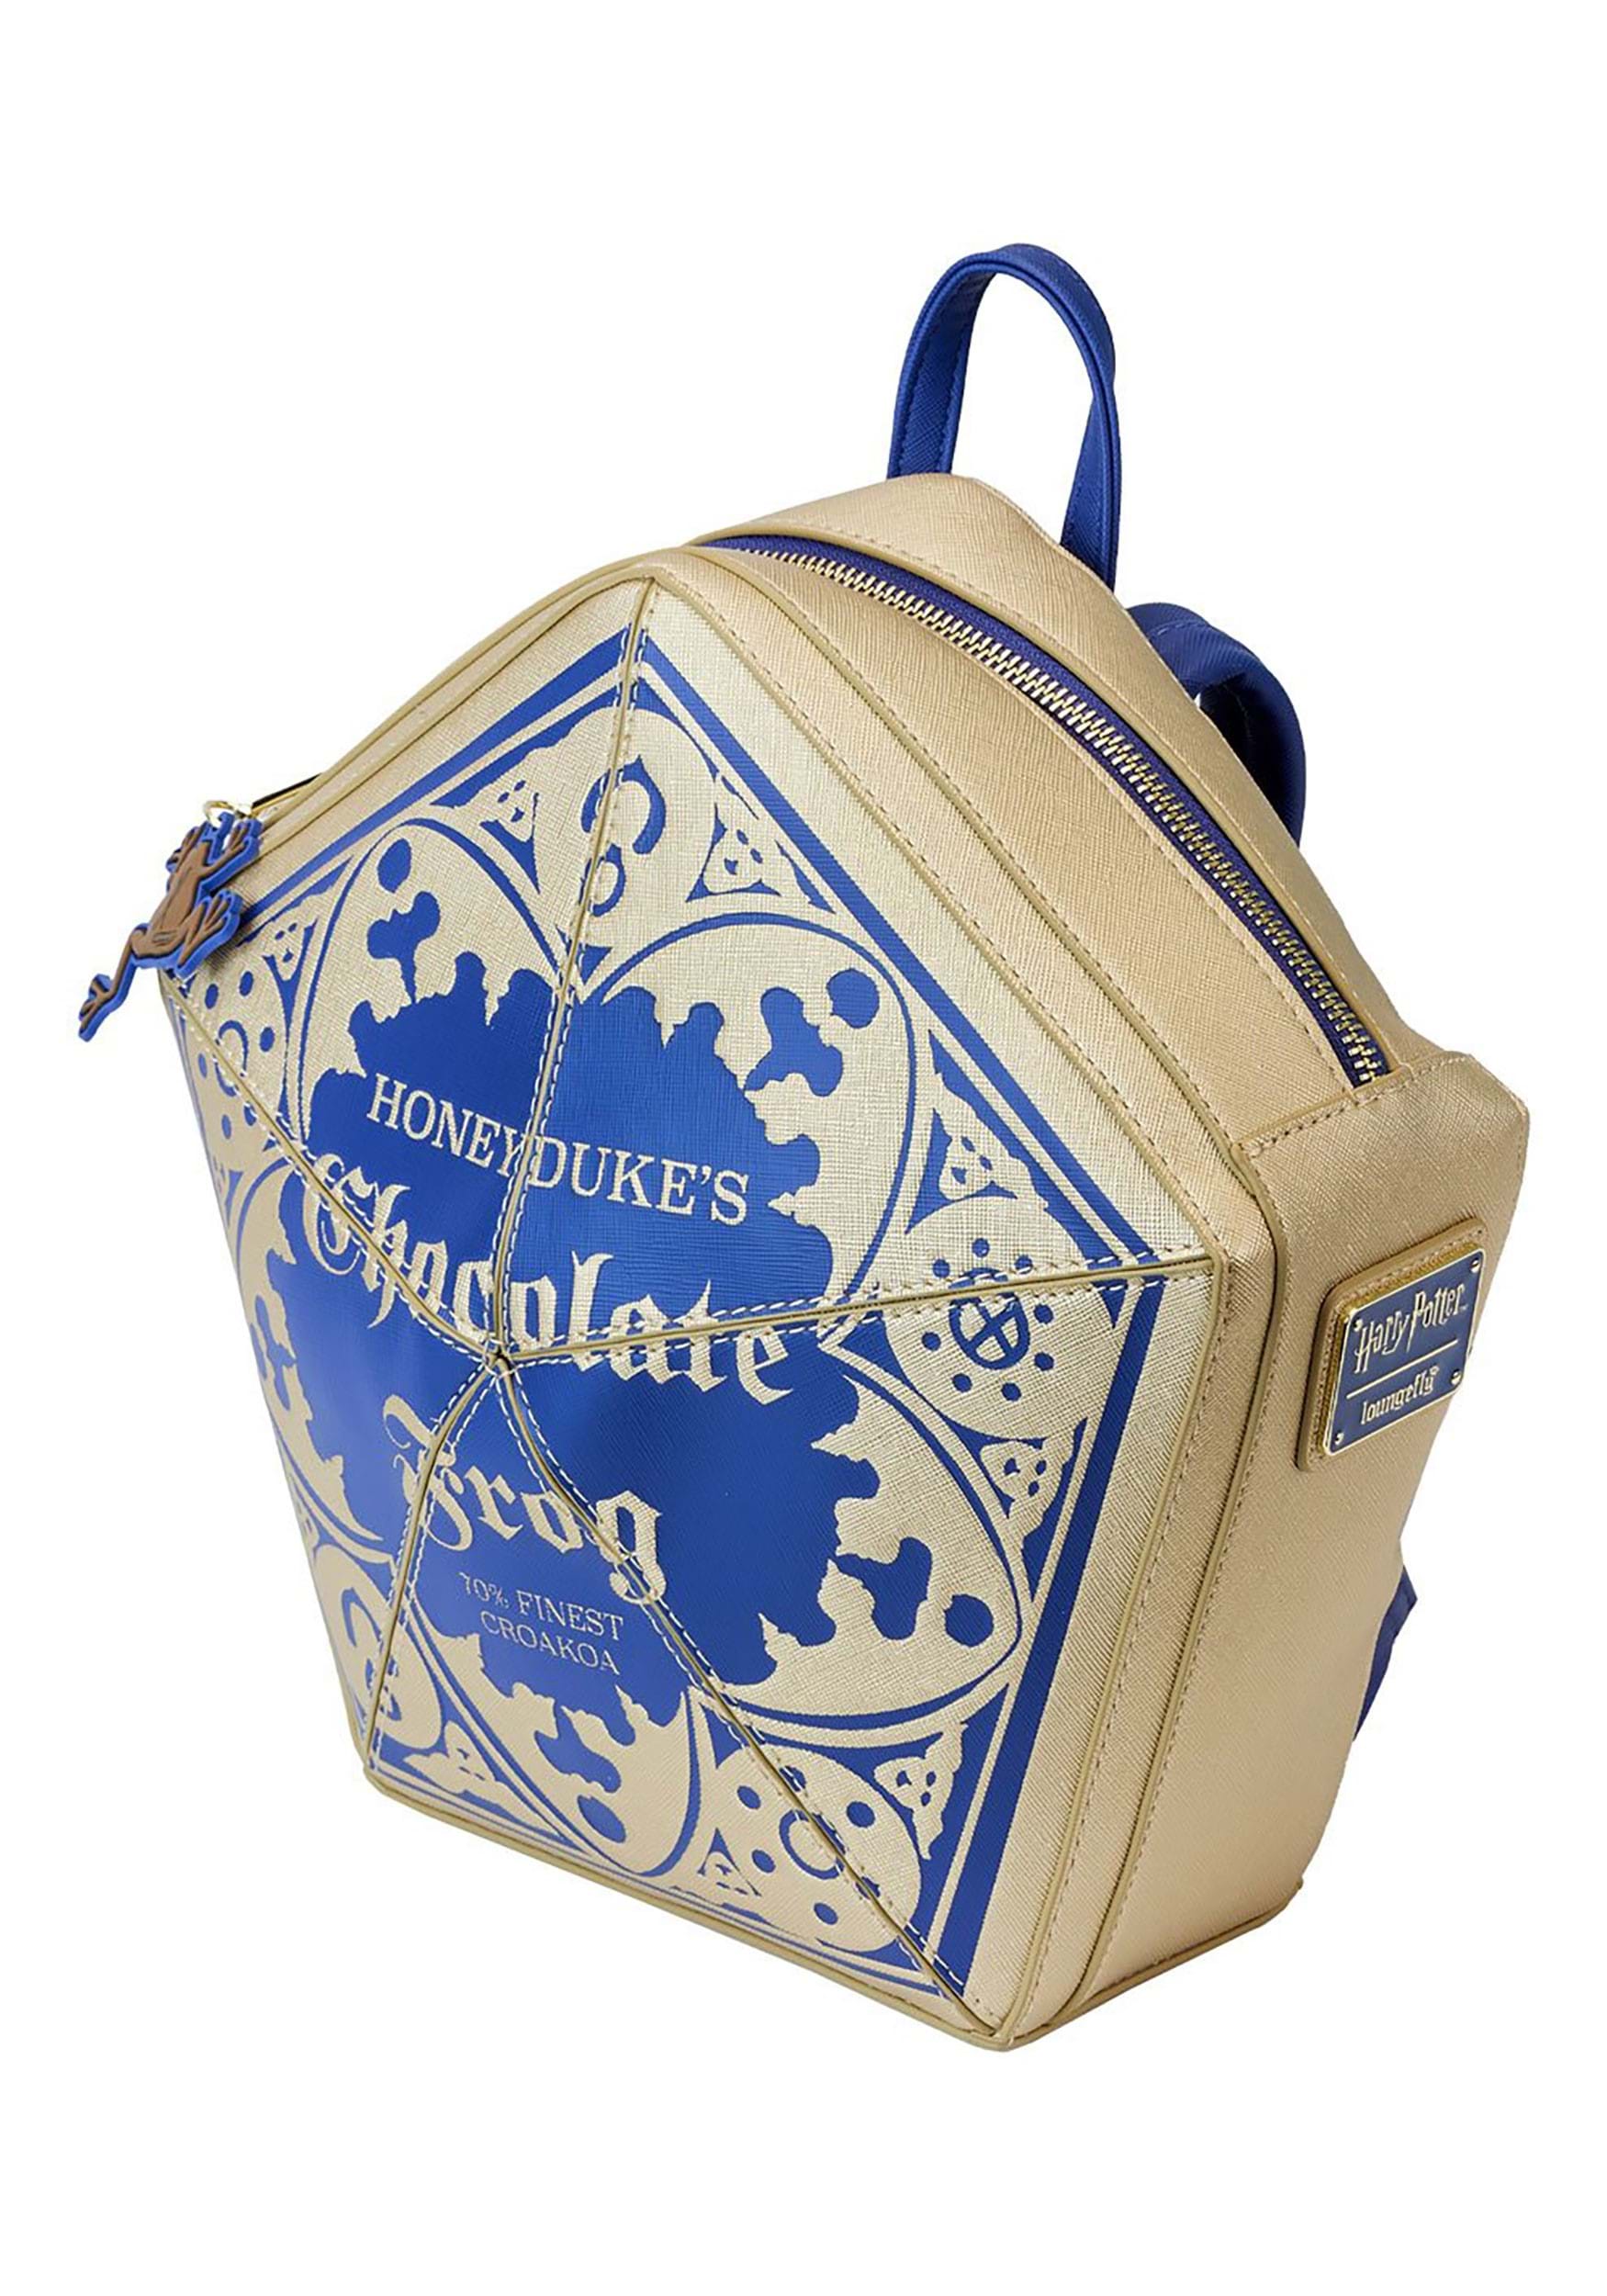 chocolate frogs harry potter